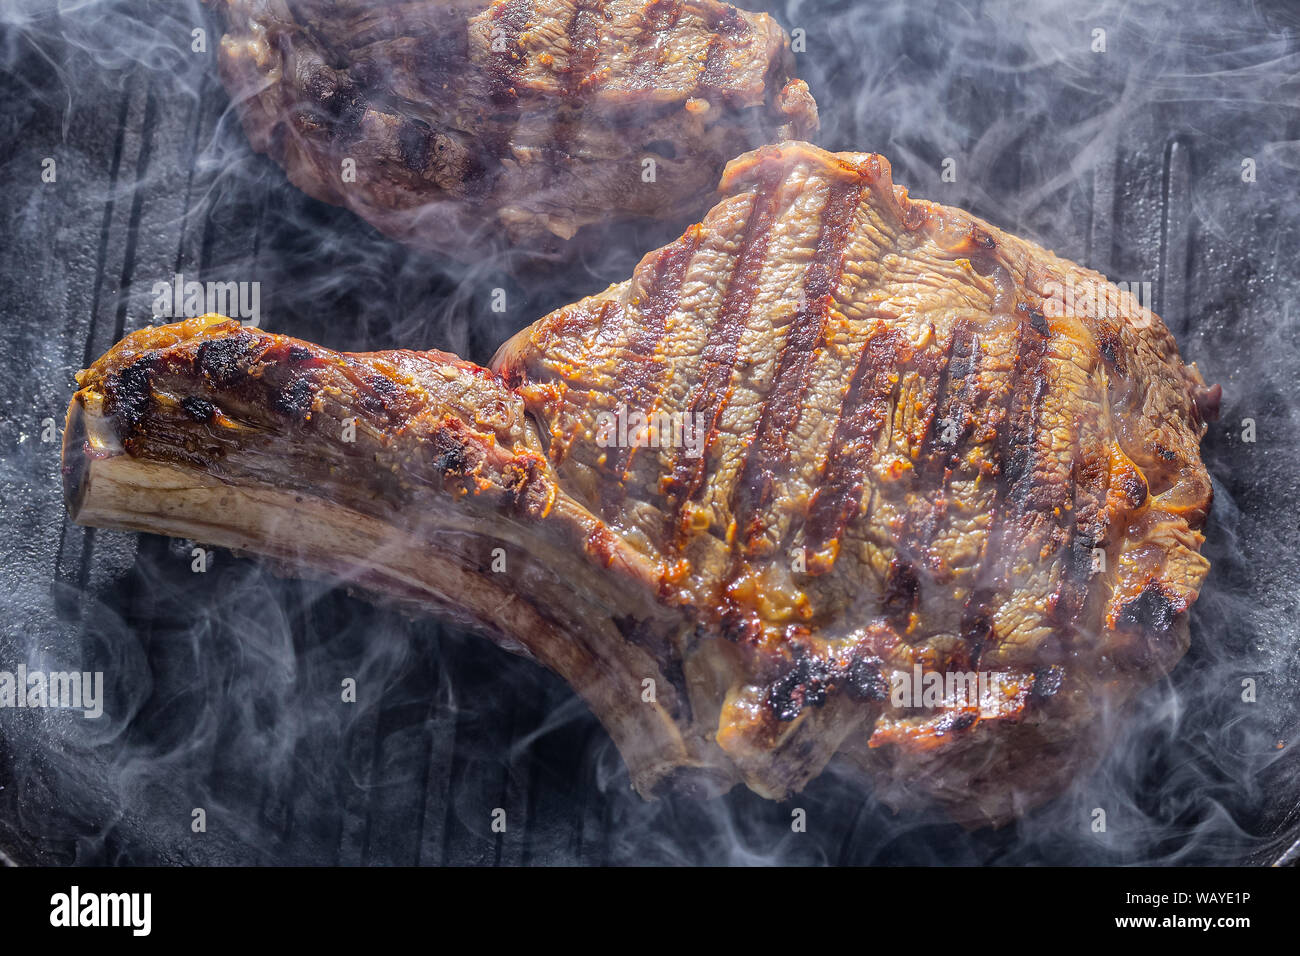 Smoke And Steam Rise From A Beaf Steak On Grill Pan Stock Photo Alamy